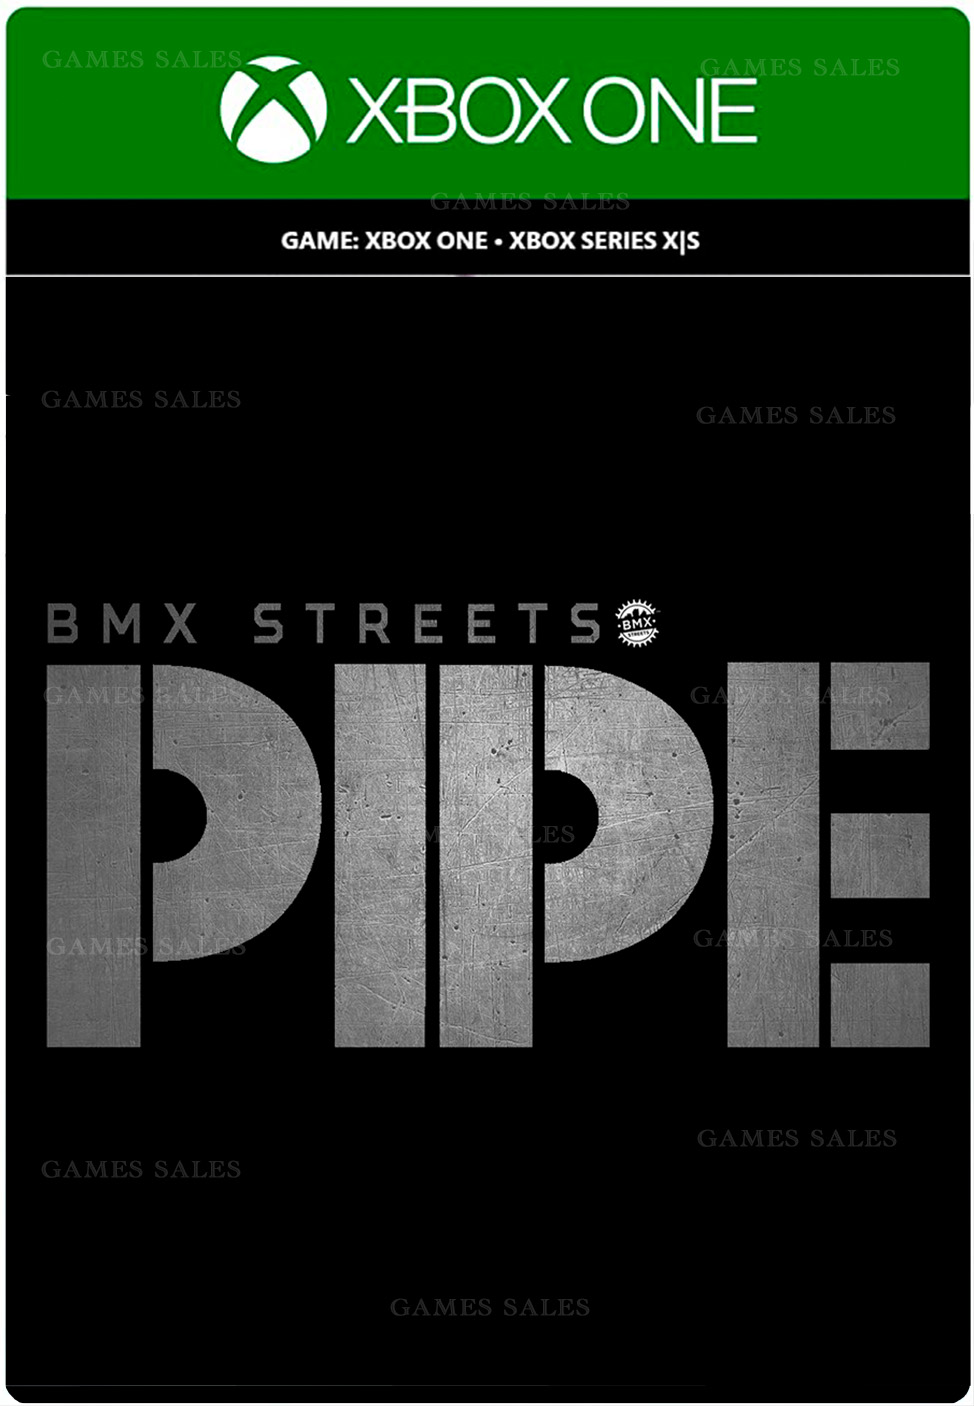 Bmx streets pipe steam фото 28